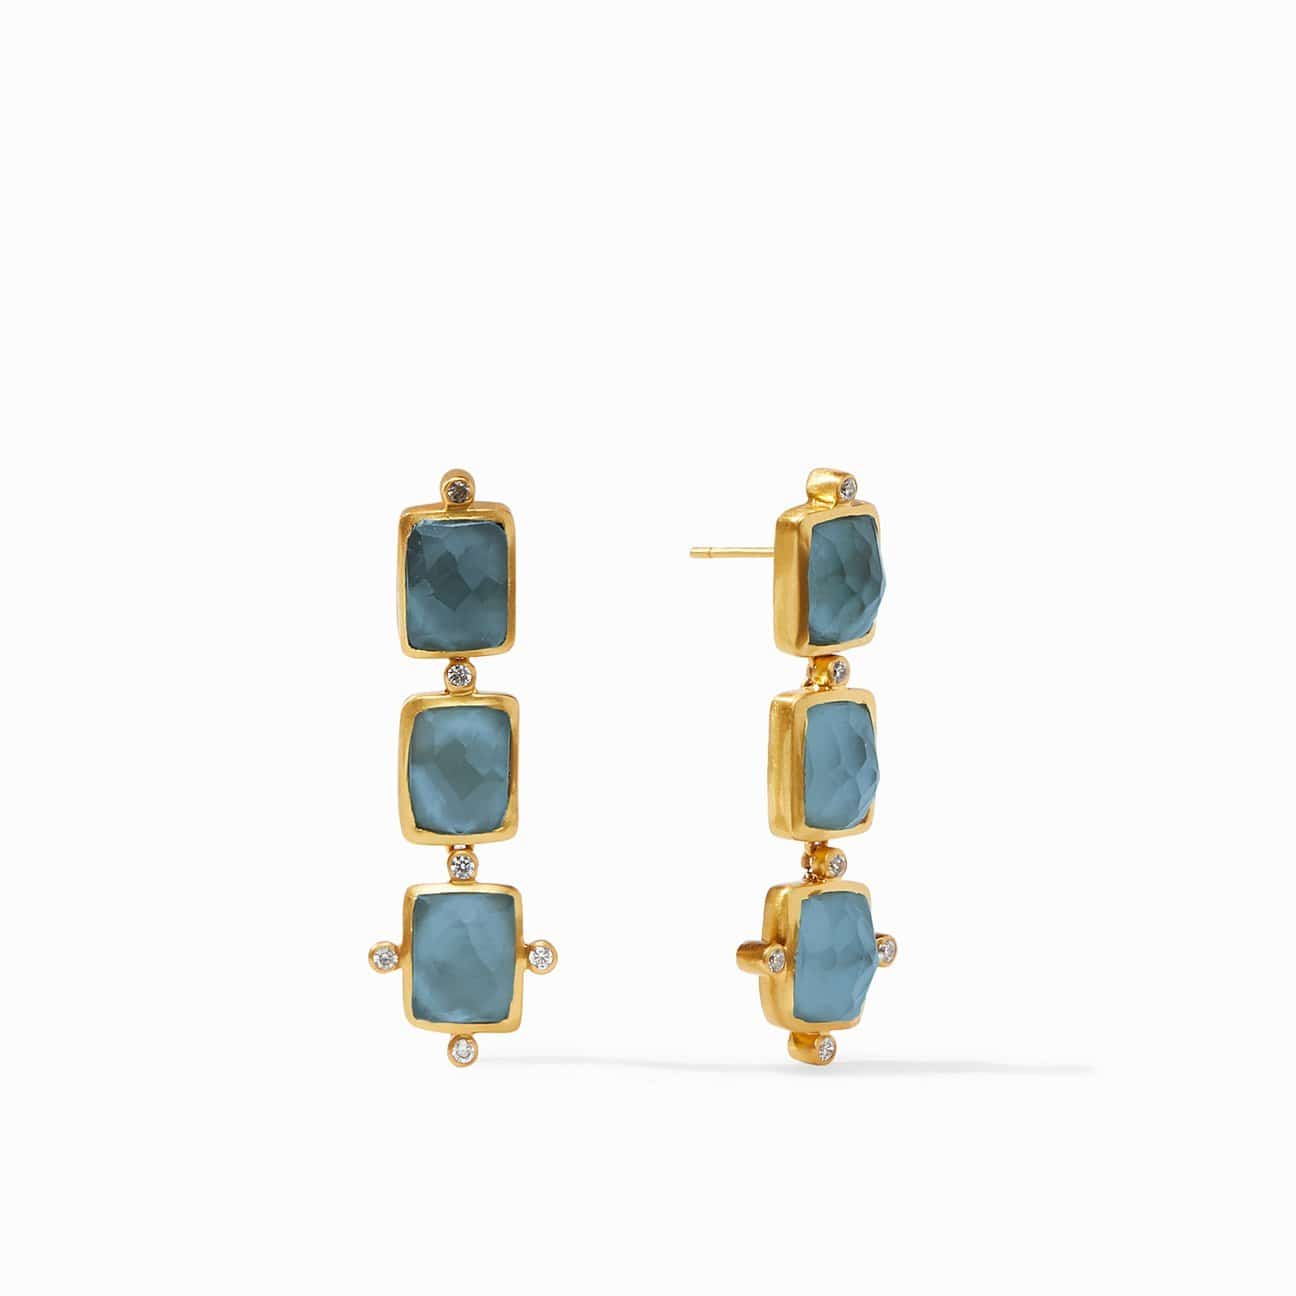 Julie Vos - Julie Vos Clara Tier Earrings with Iridescent Auzre Blue Stones and Zircon Accents - Little Miss Muffin Children & Home